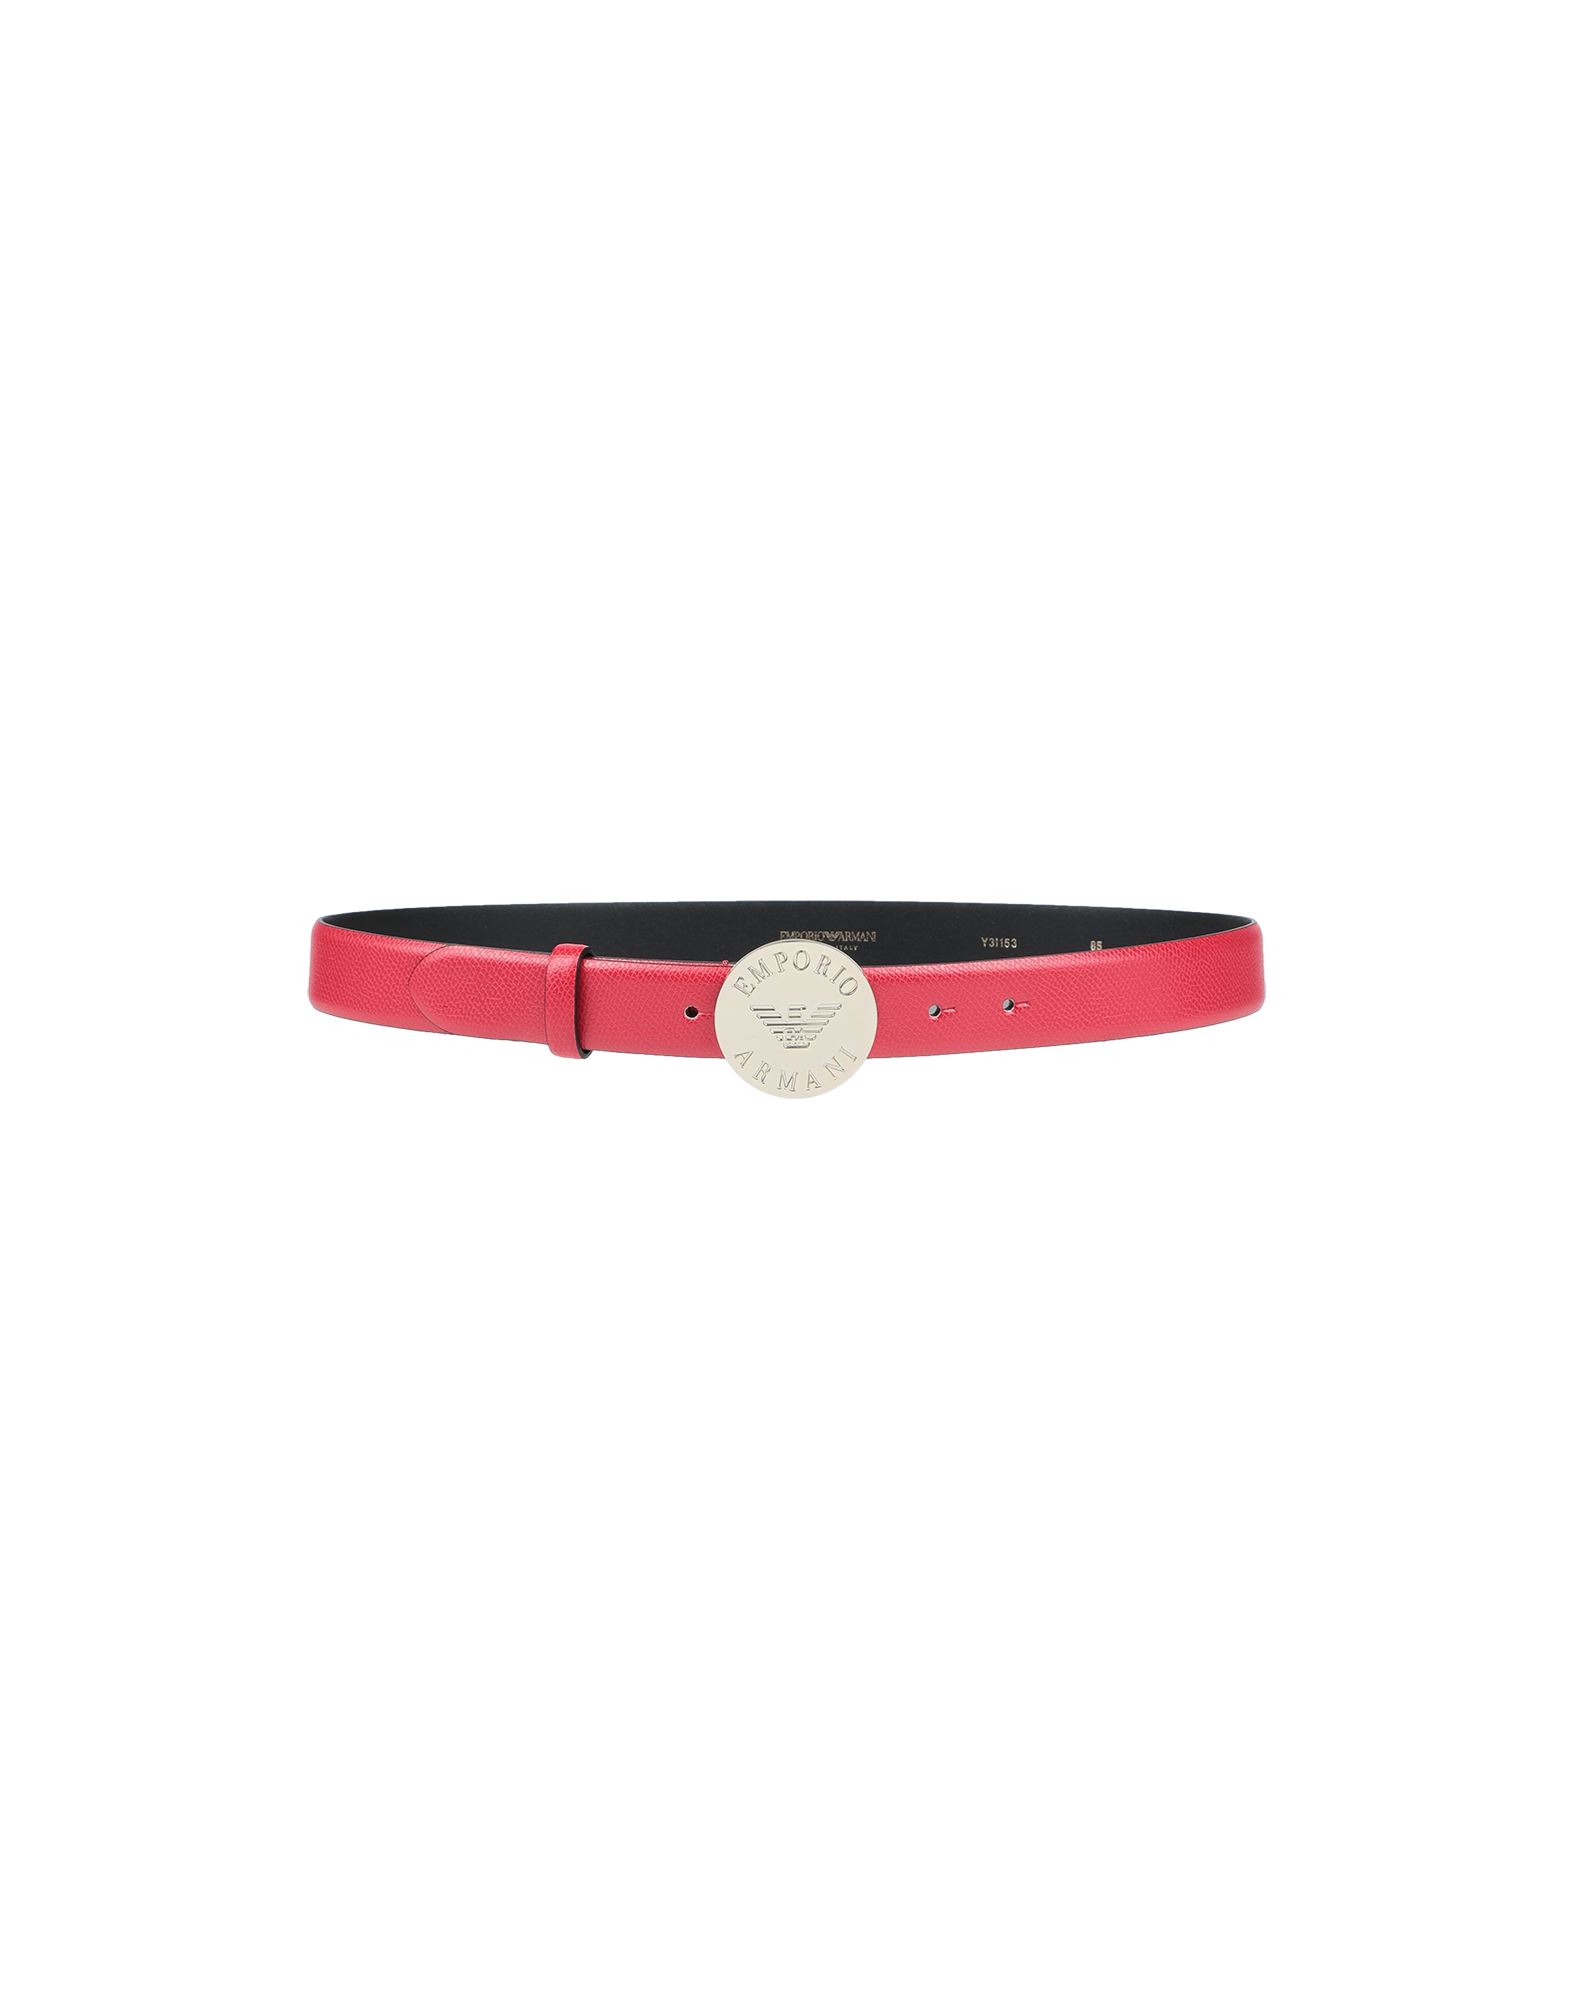 Shop Emporio Armani Woman Belt Red Size 34 Soft Leather